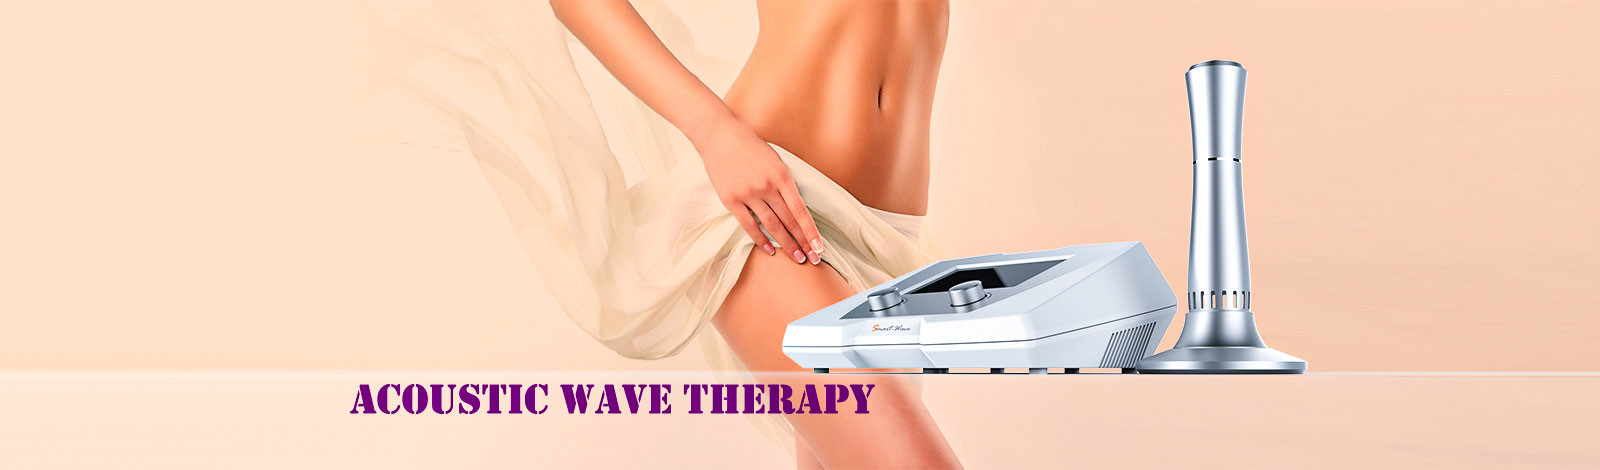 Acoustic Wave Therapy Machine